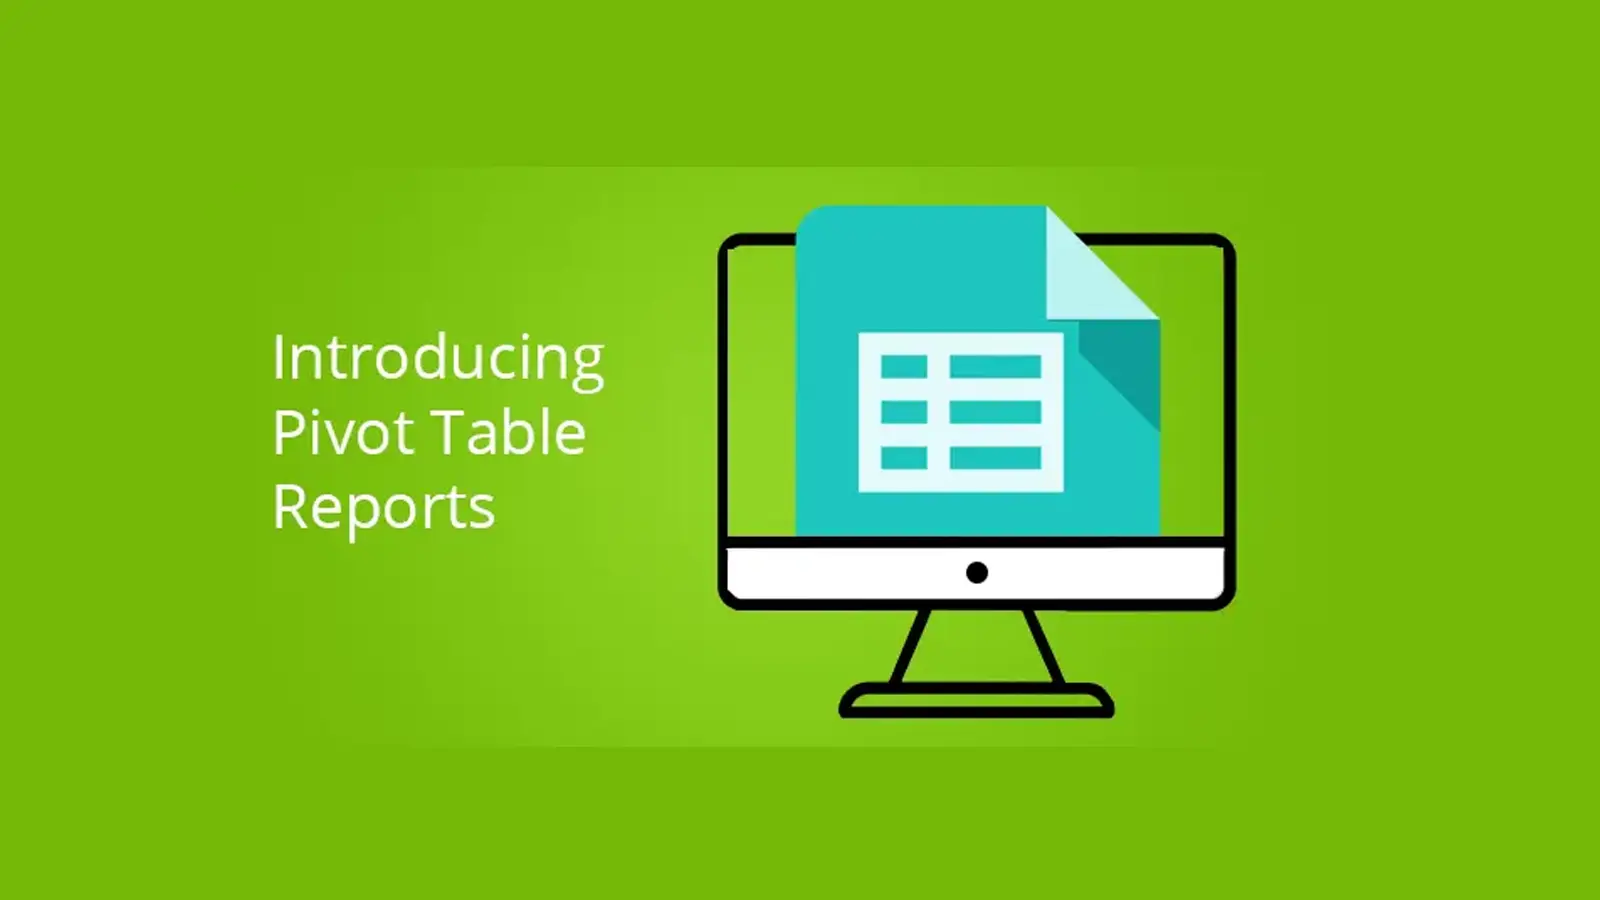 Introducing Pivot Table Reports